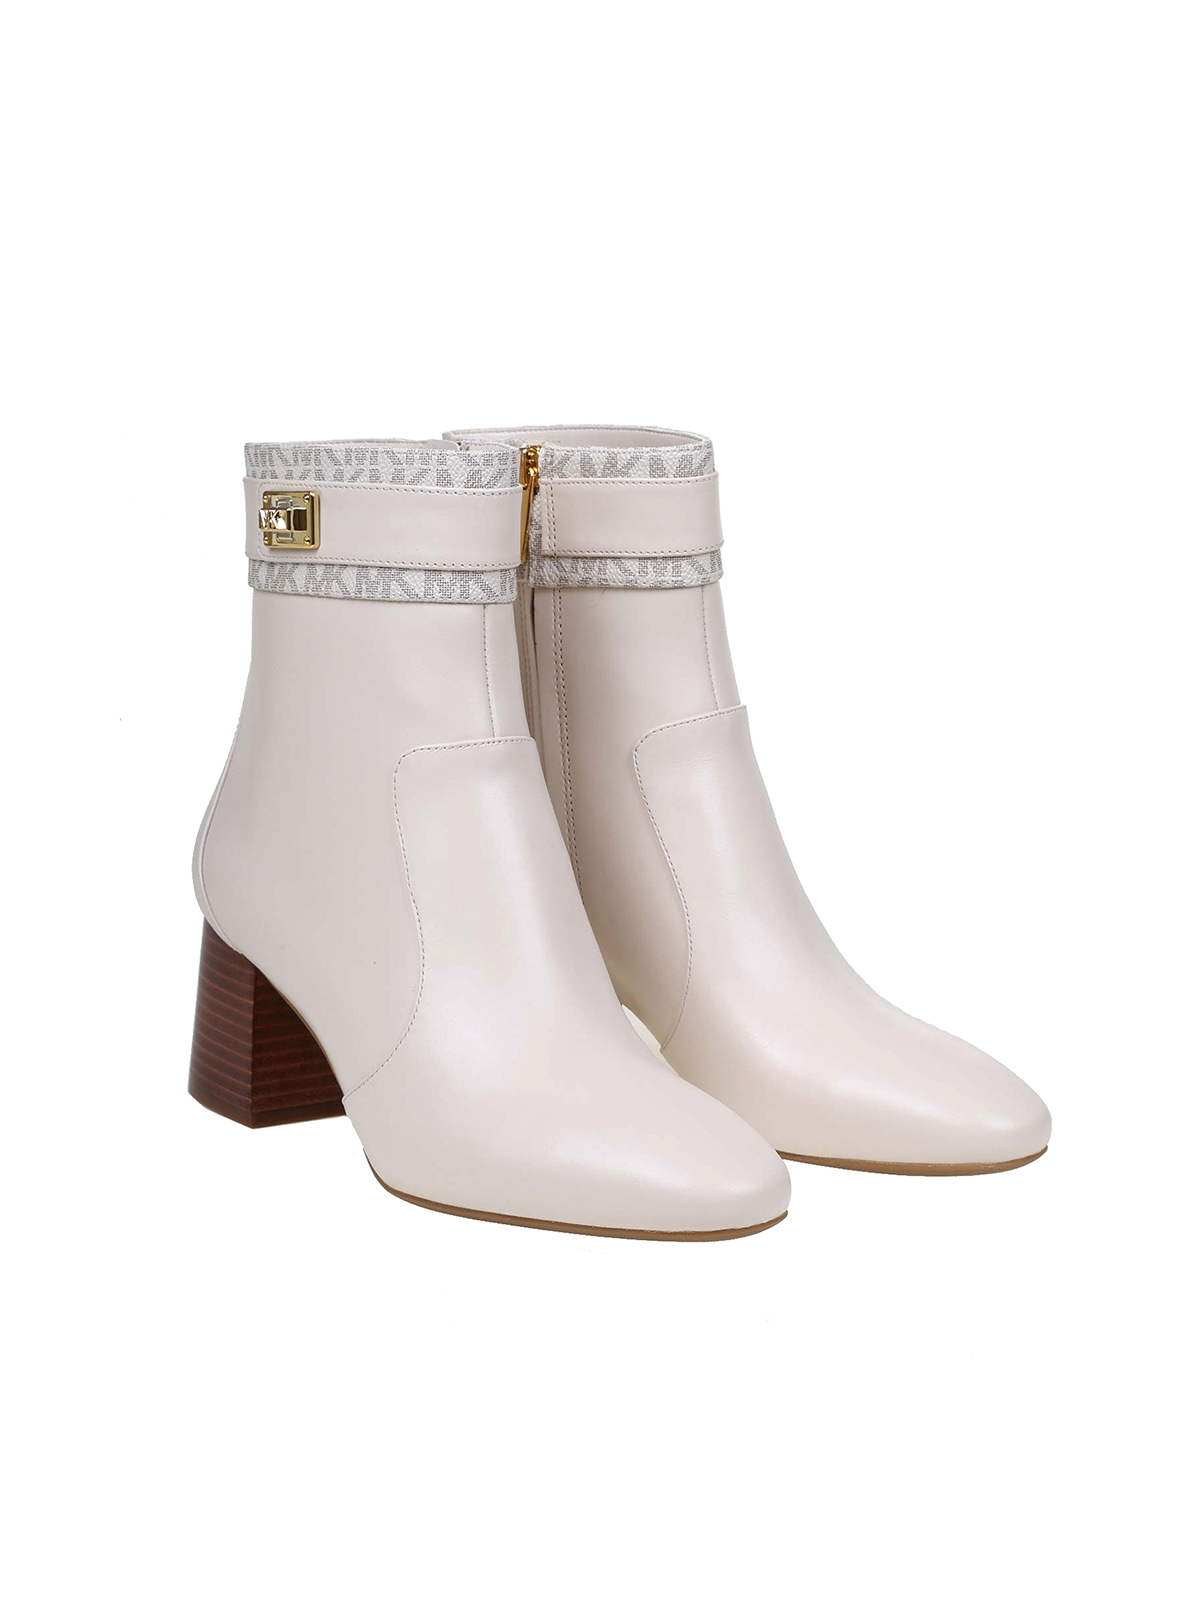 Ankle boots Michael Kors - Michael kors boot in cream color - 40T2PDME6L132